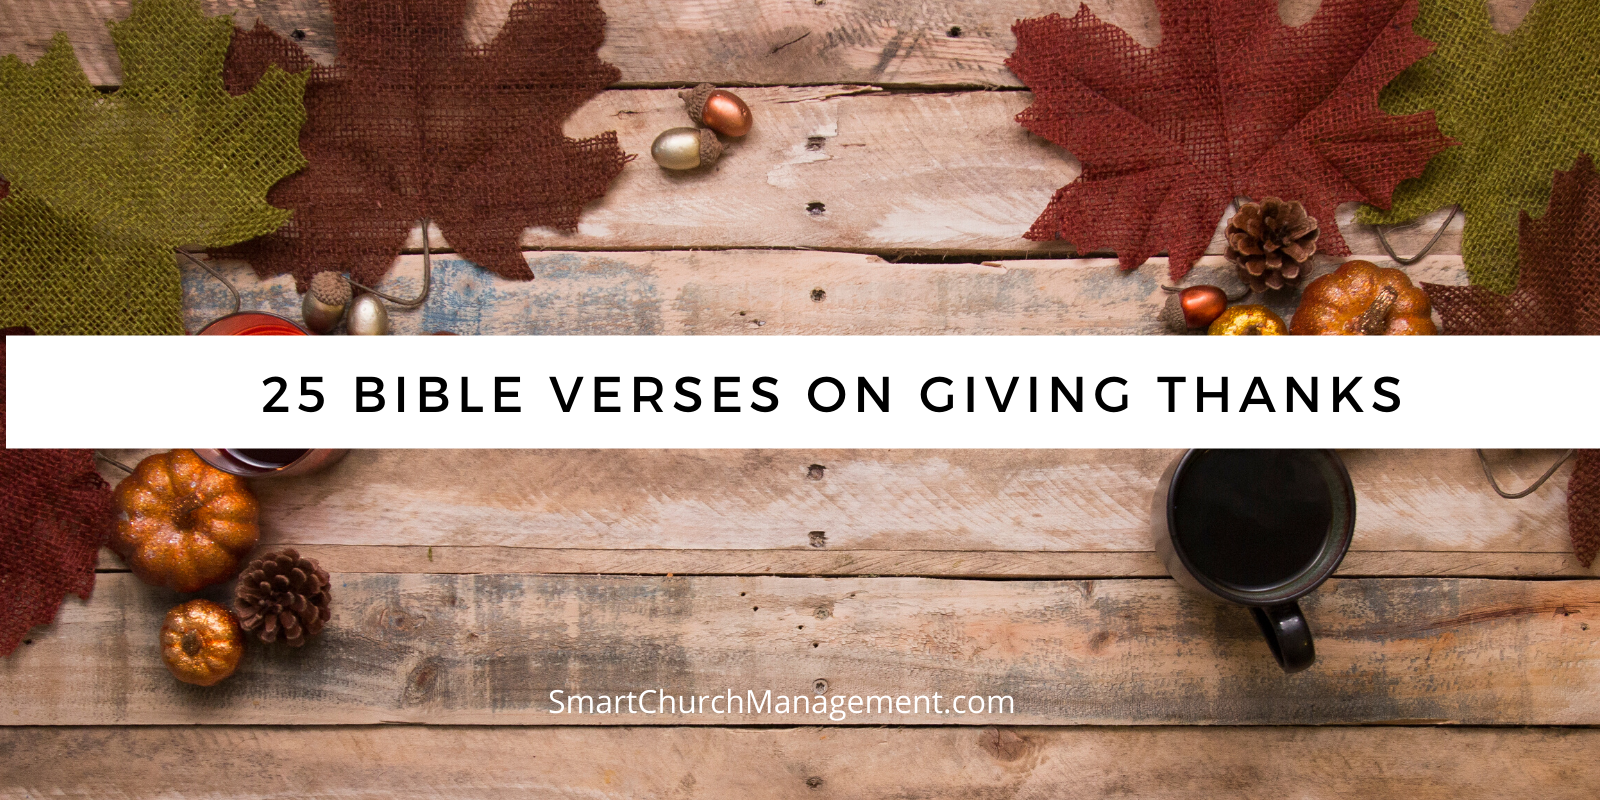 Bible verses on giving thanks